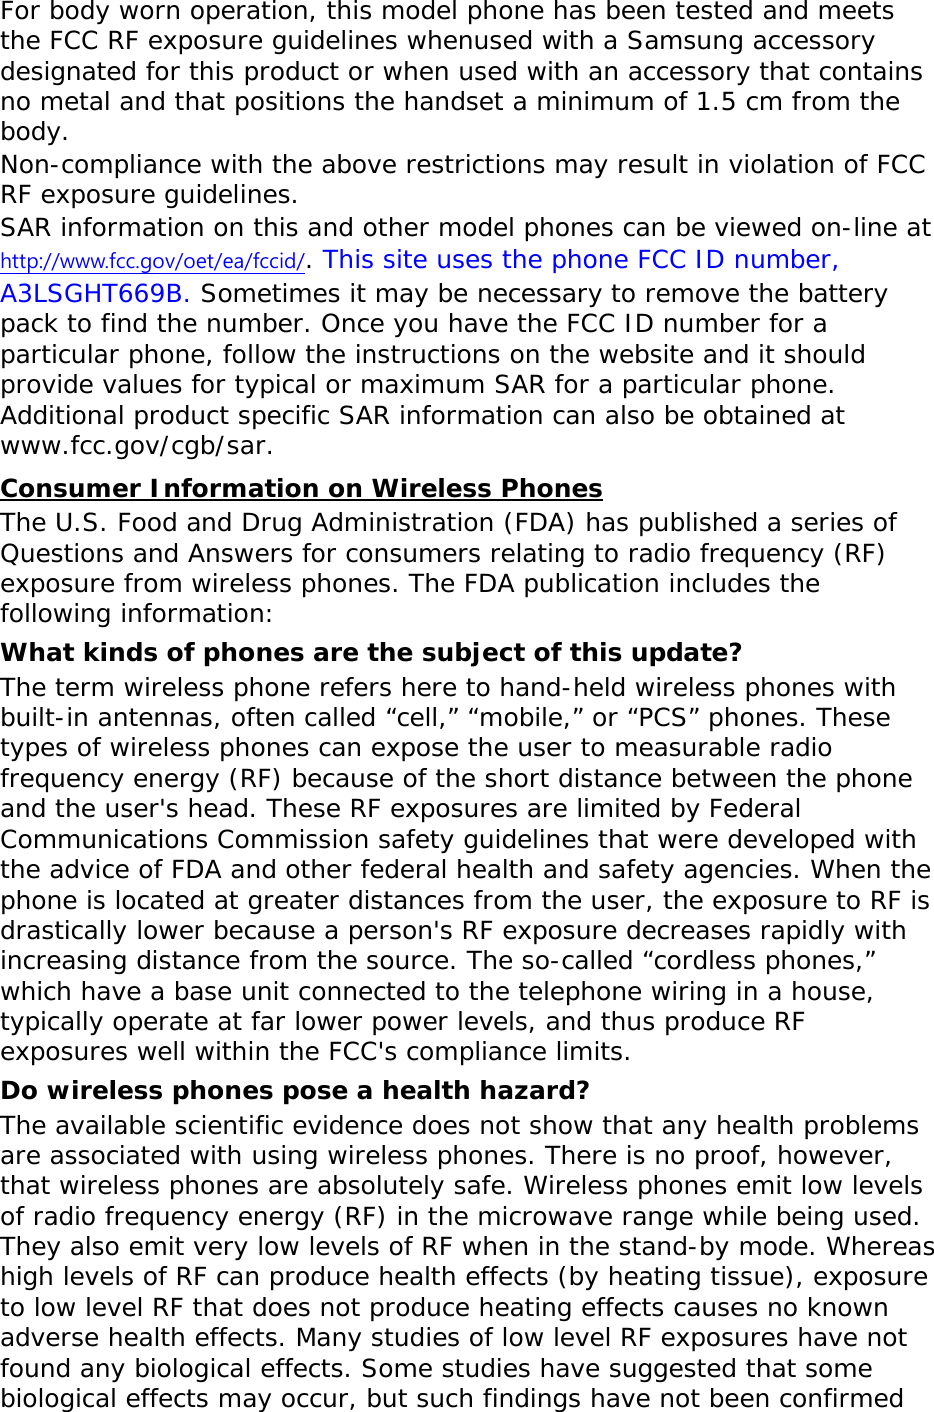 For body worn operation, this model phone has been tested and meets the FCC RF exposure guidelines whenused with a Samsung accessory designated for this product or when used with an accessory that contains no metal and that positions the handset a minimum of 1.5 cm from the body.  Non-compliance with the above restrictions may result in violation of FCC RF exposure guidelines. SAR information on this and other model phones can be viewed on-line at http://www.fcc.gov/oet/ea/fccid/. This site uses the phone FCC ID number, A3LSGHT669B. Sometimes it may be necessary to remove the battery pack to find the number. Once you have the FCC ID number for a particular phone, follow the instructions on the website and it should provide values for typical or maximum SAR for a particular phone. Additional product specific SAR information can also be obtained at www.fcc.gov/cgb/sar. Consumer Information on Wireless Phones The U.S. Food and Drug Administration (FDA) has published a series of Questions and Answers for consumers relating to radio frequency (RF) exposure from wireless phones. The FDA publication includes the following information: What kinds of phones are the subject of this update? The term wireless phone refers here to hand-held wireless phones with built-in antennas, often called “cell,” “mobile,” or “PCS” phones. These types of wireless phones can expose the user to measurable radio frequency energy (RF) because of the short distance between the phone and the user&apos;s head. These RF exposures are limited by Federal Communications Commission safety guidelines that were developed with the advice of FDA and other federal health and safety agencies. When the phone is located at greater distances from the user, the exposure to RF is drastically lower because a person&apos;s RF exposure decreases rapidly with increasing distance from the source. The so-called “cordless phones,” which have a base unit connected to the telephone wiring in a house, typically operate at far lower power levels, and thus produce RF exposures well within the FCC&apos;s compliance limits. Do wireless phones pose a health hazard? The available scientific evidence does not show that any health problems are associated with using wireless phones. There is no proof, however, that wireless phones are absolutely safe. Wireless phones emit low levels of radio frequency energy (RF) in the microwave range while being used. They also emit very low levels of RF when in the stand-by mode. Whereas high levels of RF can produce health effects (by heating tissue), exposure to low level RF that does not produce heating effects causes no known adverse health effects. Many studies of low level RF exposures have not found any biological effects. Some studies have suggested that some biological effects may occur, but such findings have not been confirmed 